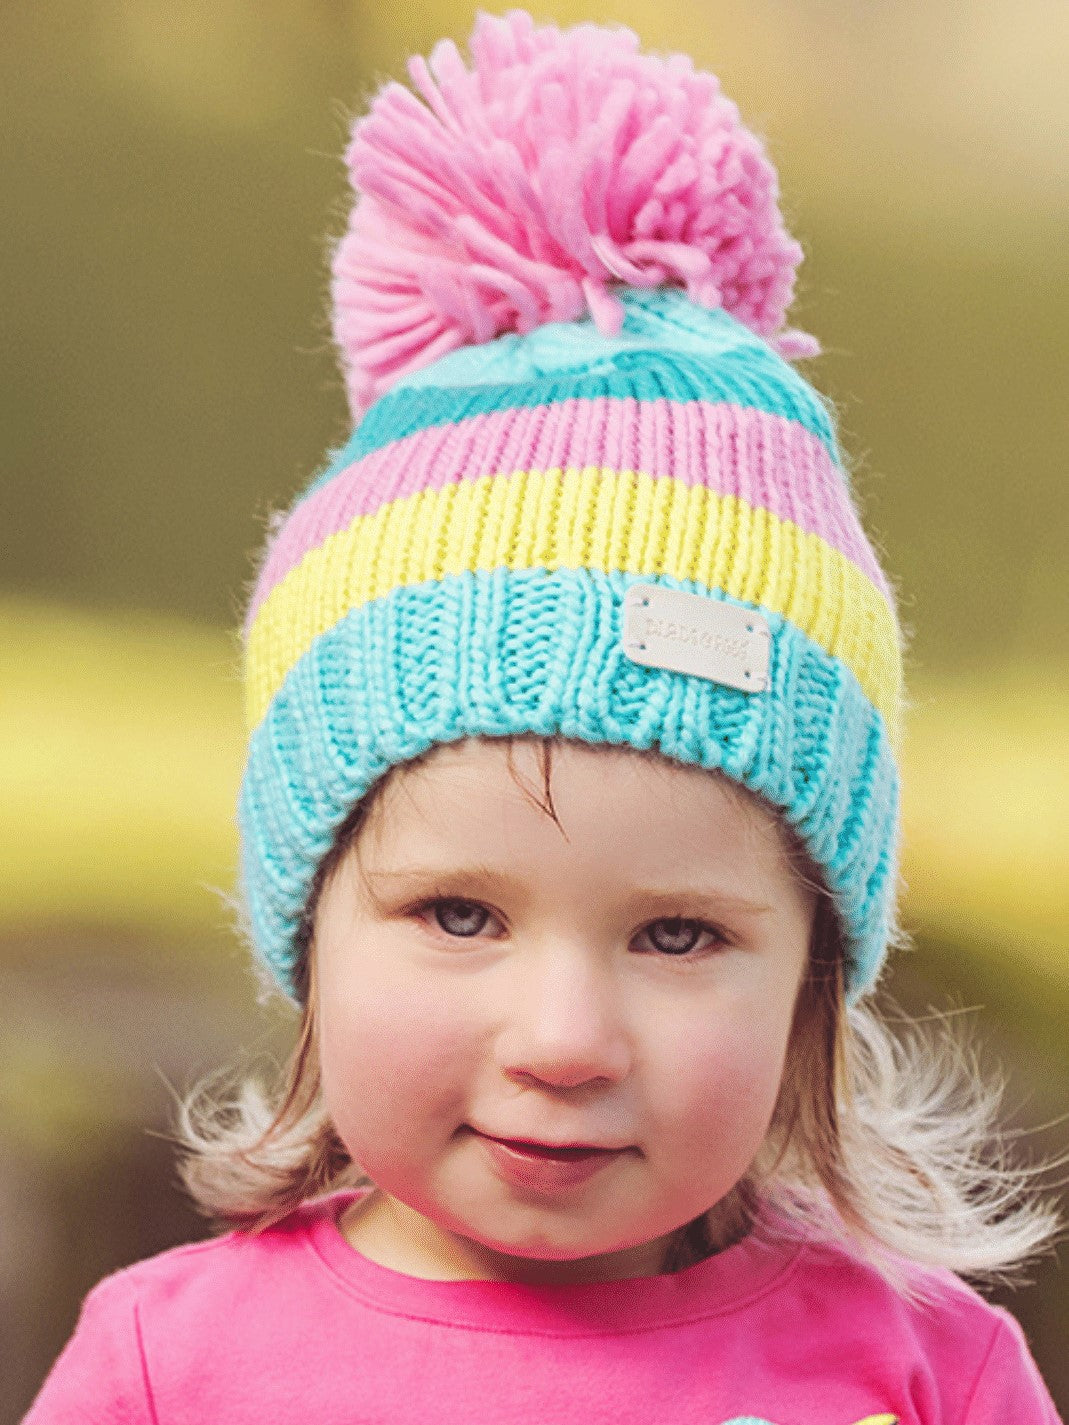 turquoise, teal, yellow and pink knitted hat with a pom pom on top